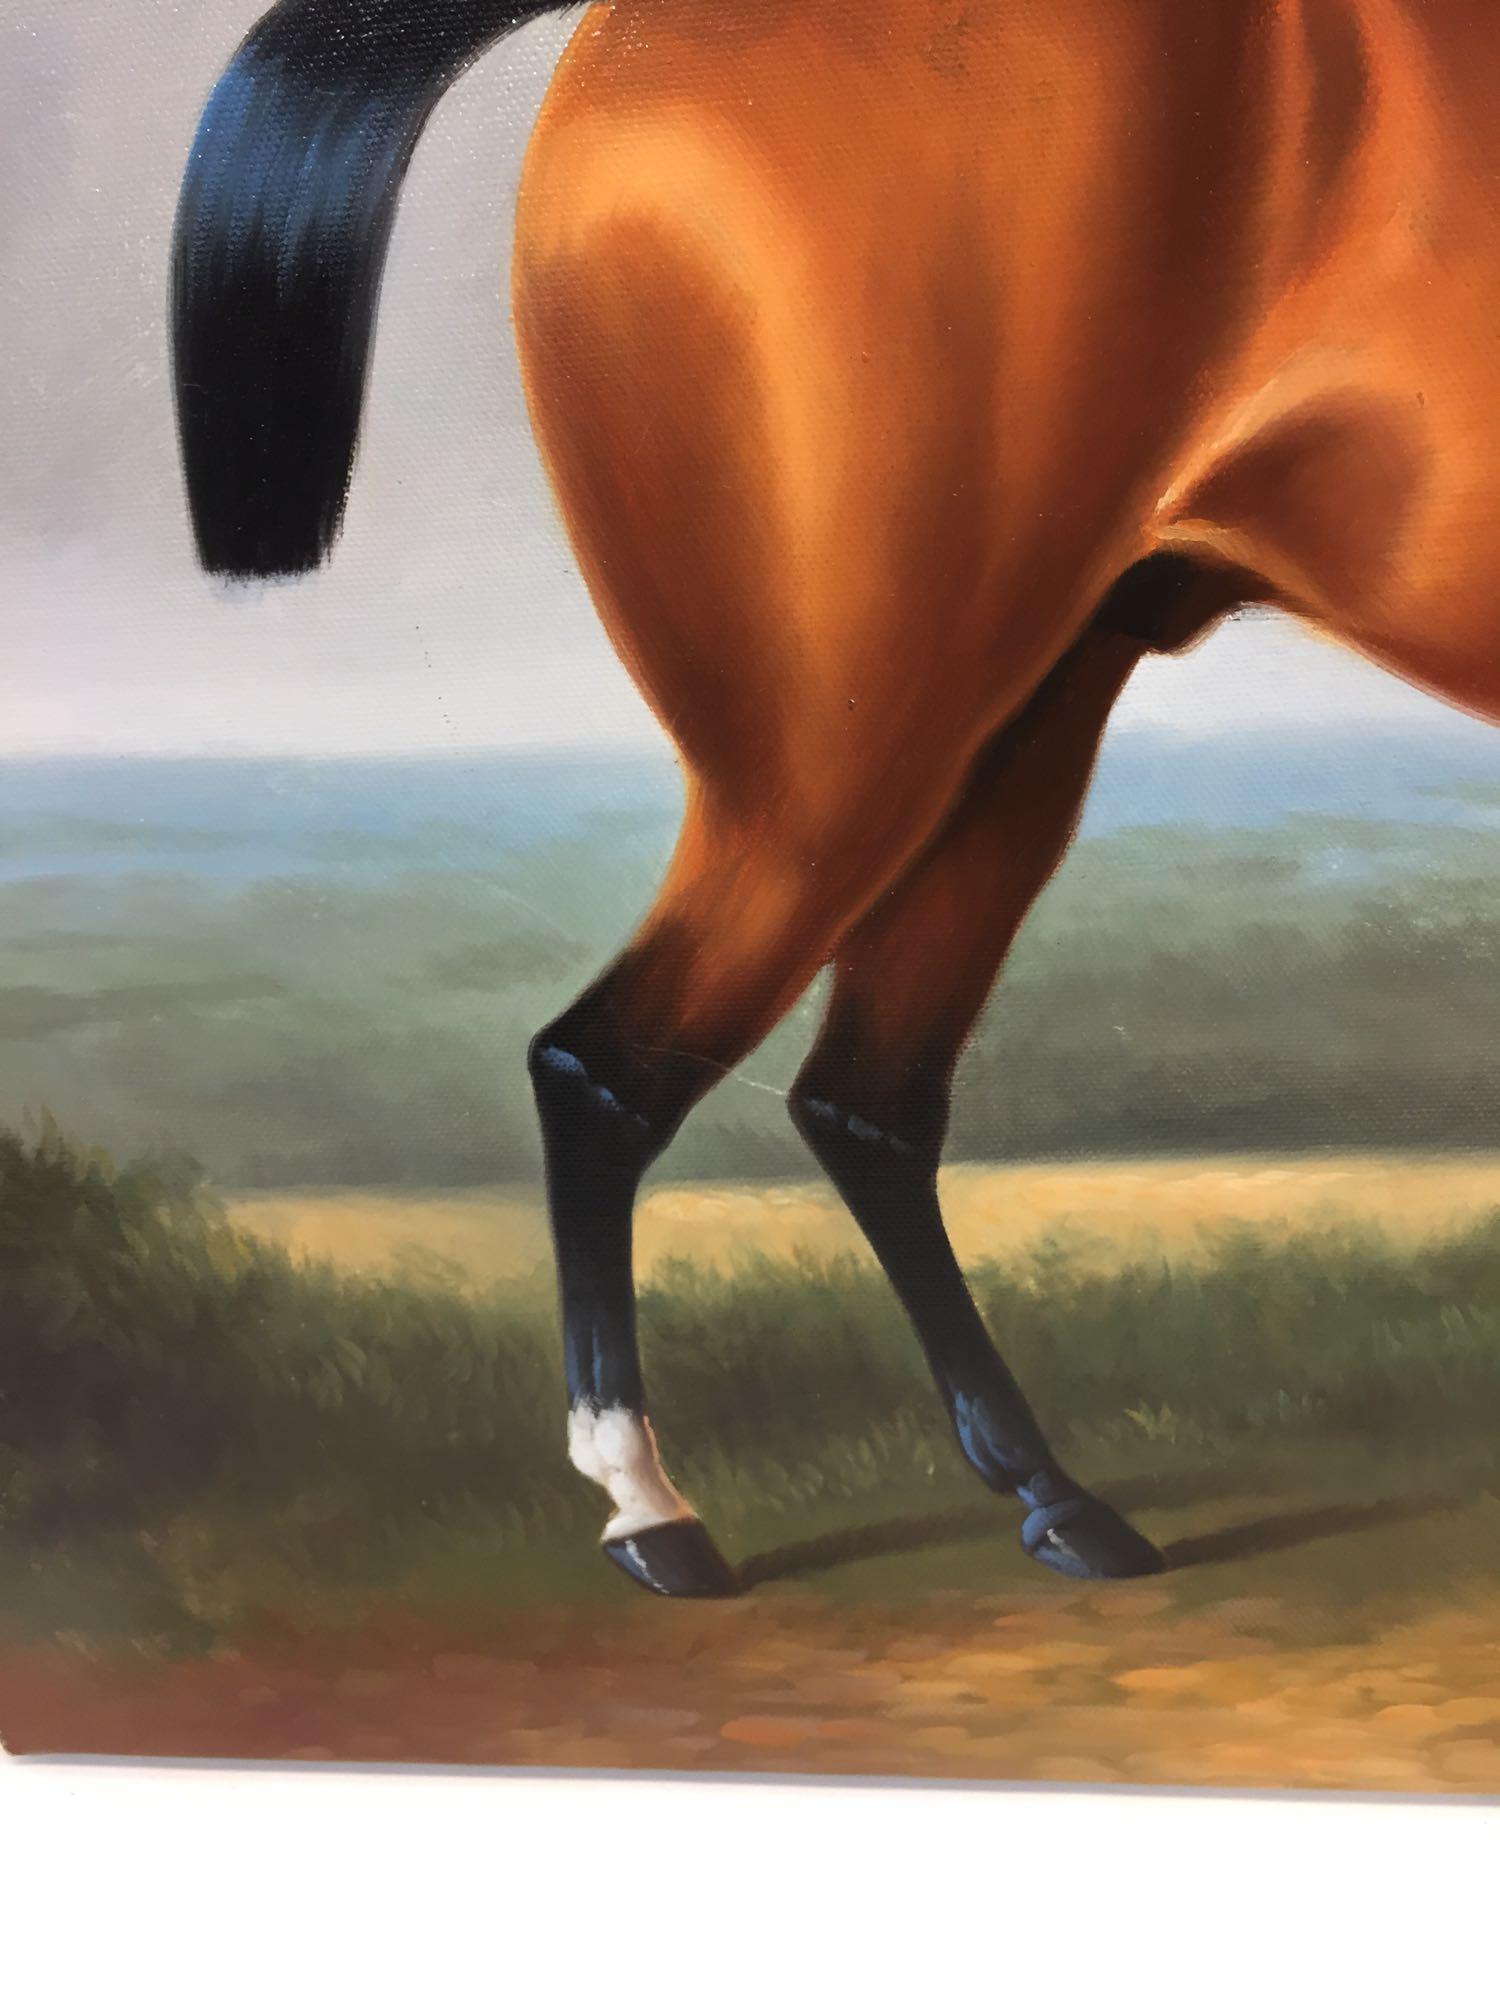 Signed Horse Art on Canvas 24x20.5in